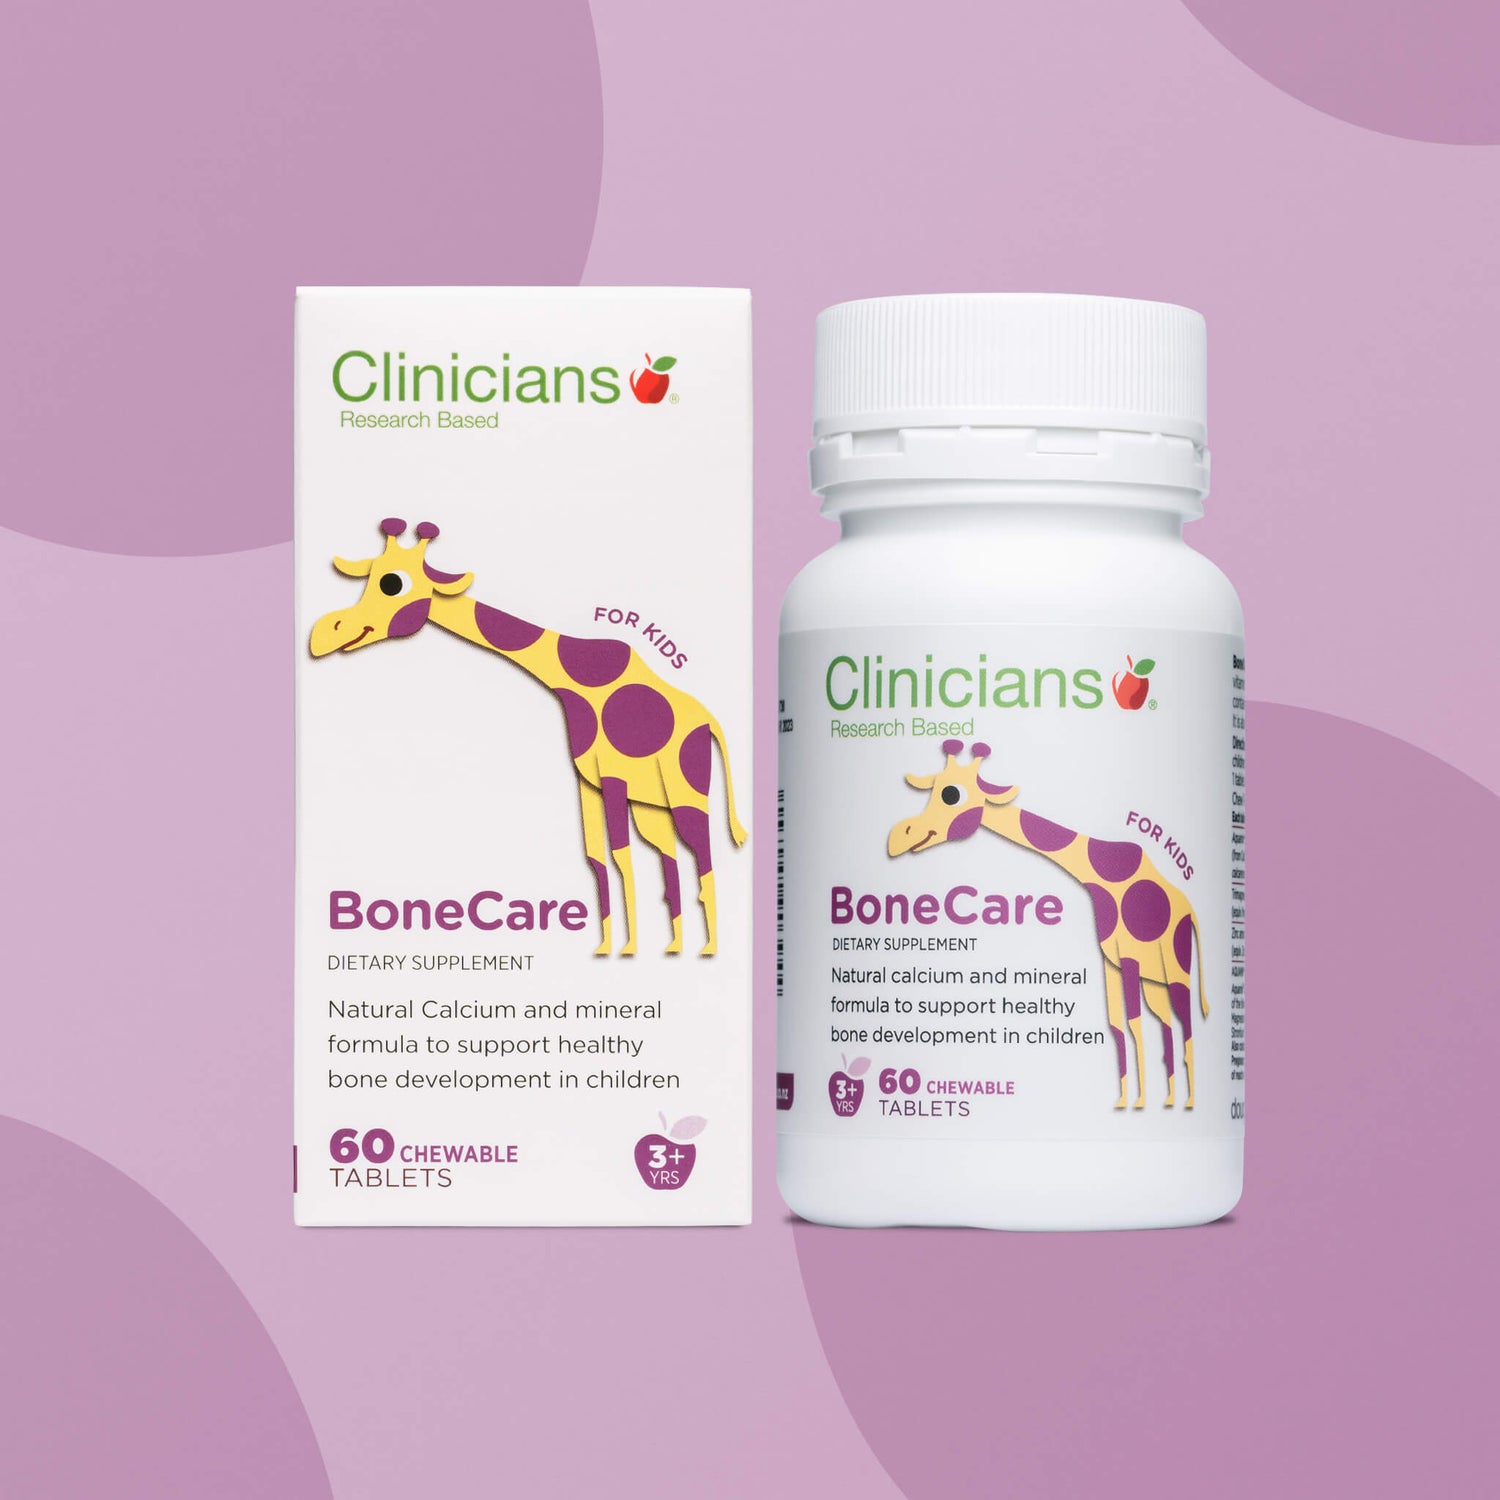 Clinicians BoneCare product shots in bottle and cardboard packaging